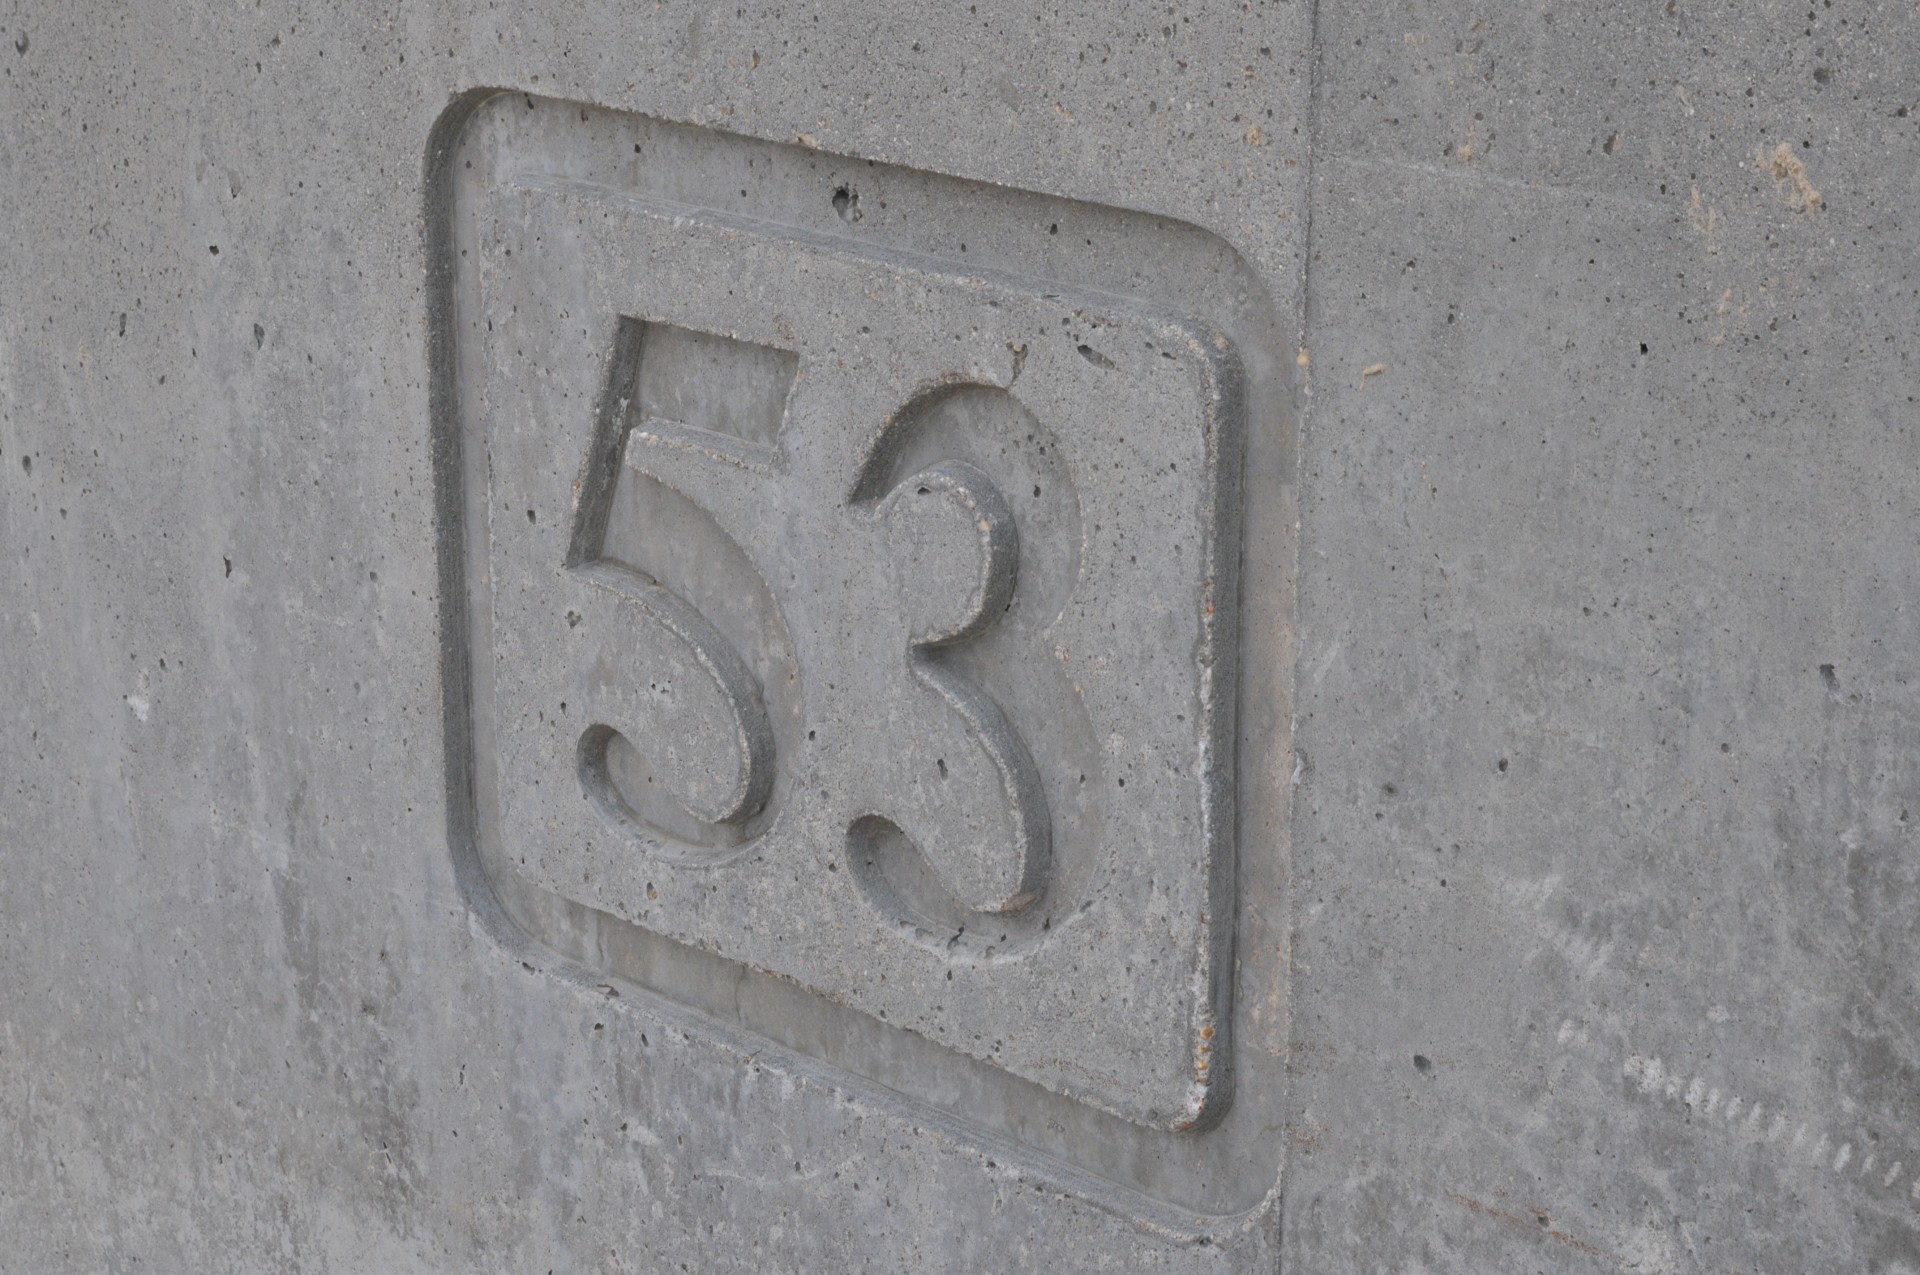 the number 53 on a wall indicating the street number from the beach